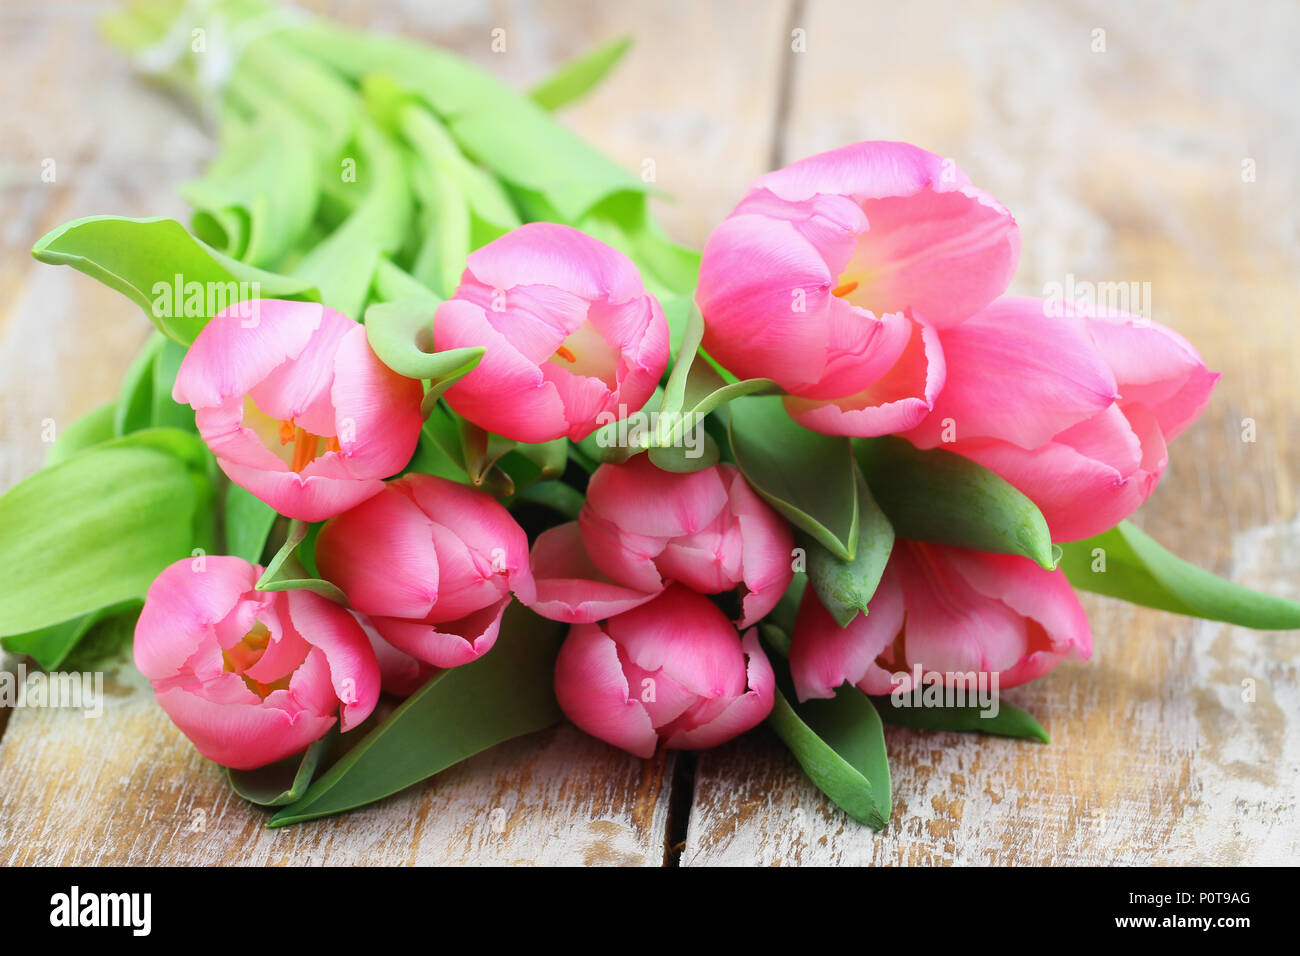 Bunch of pink Dutch tulips on rustic wooden surface with copy space Stock Photo